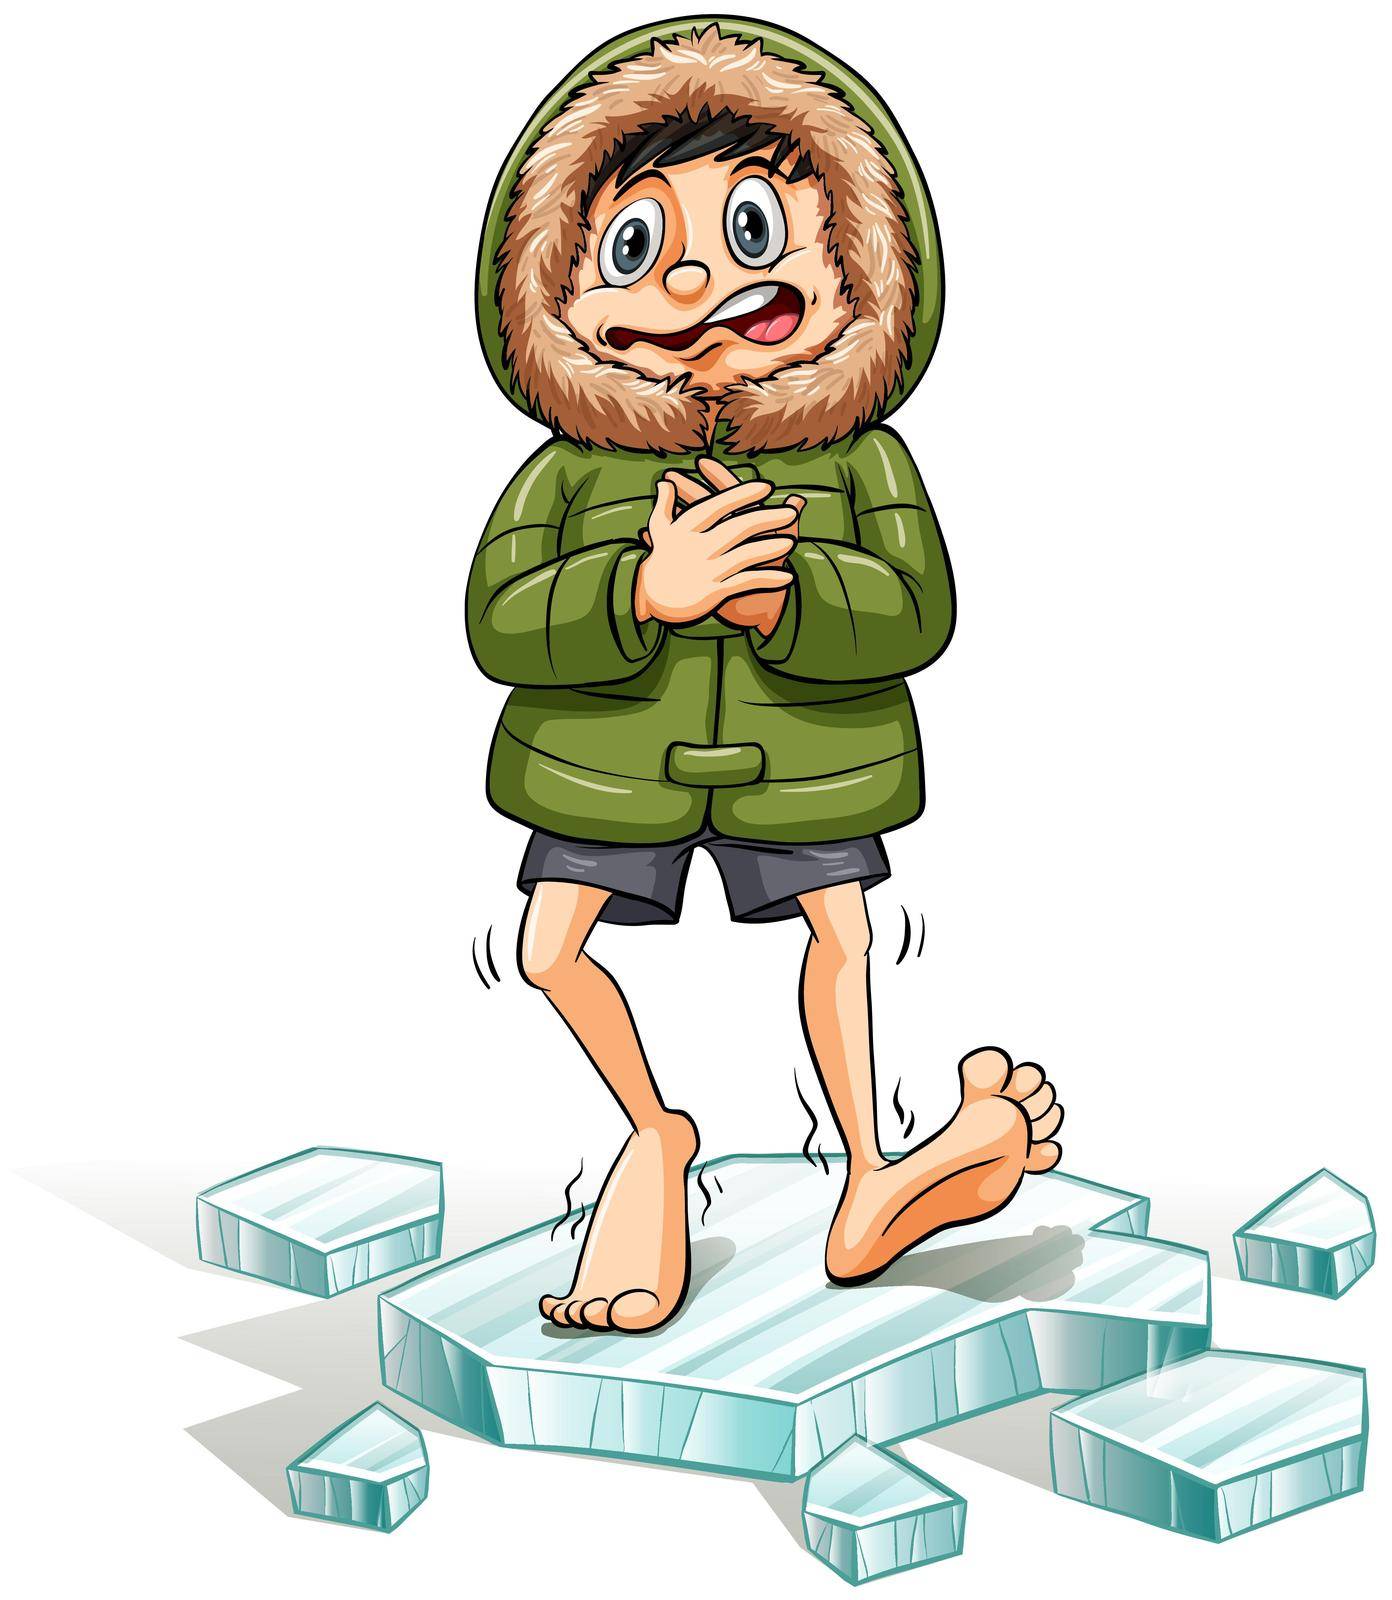 An idiom showing a boy getting a cold feet on a white background